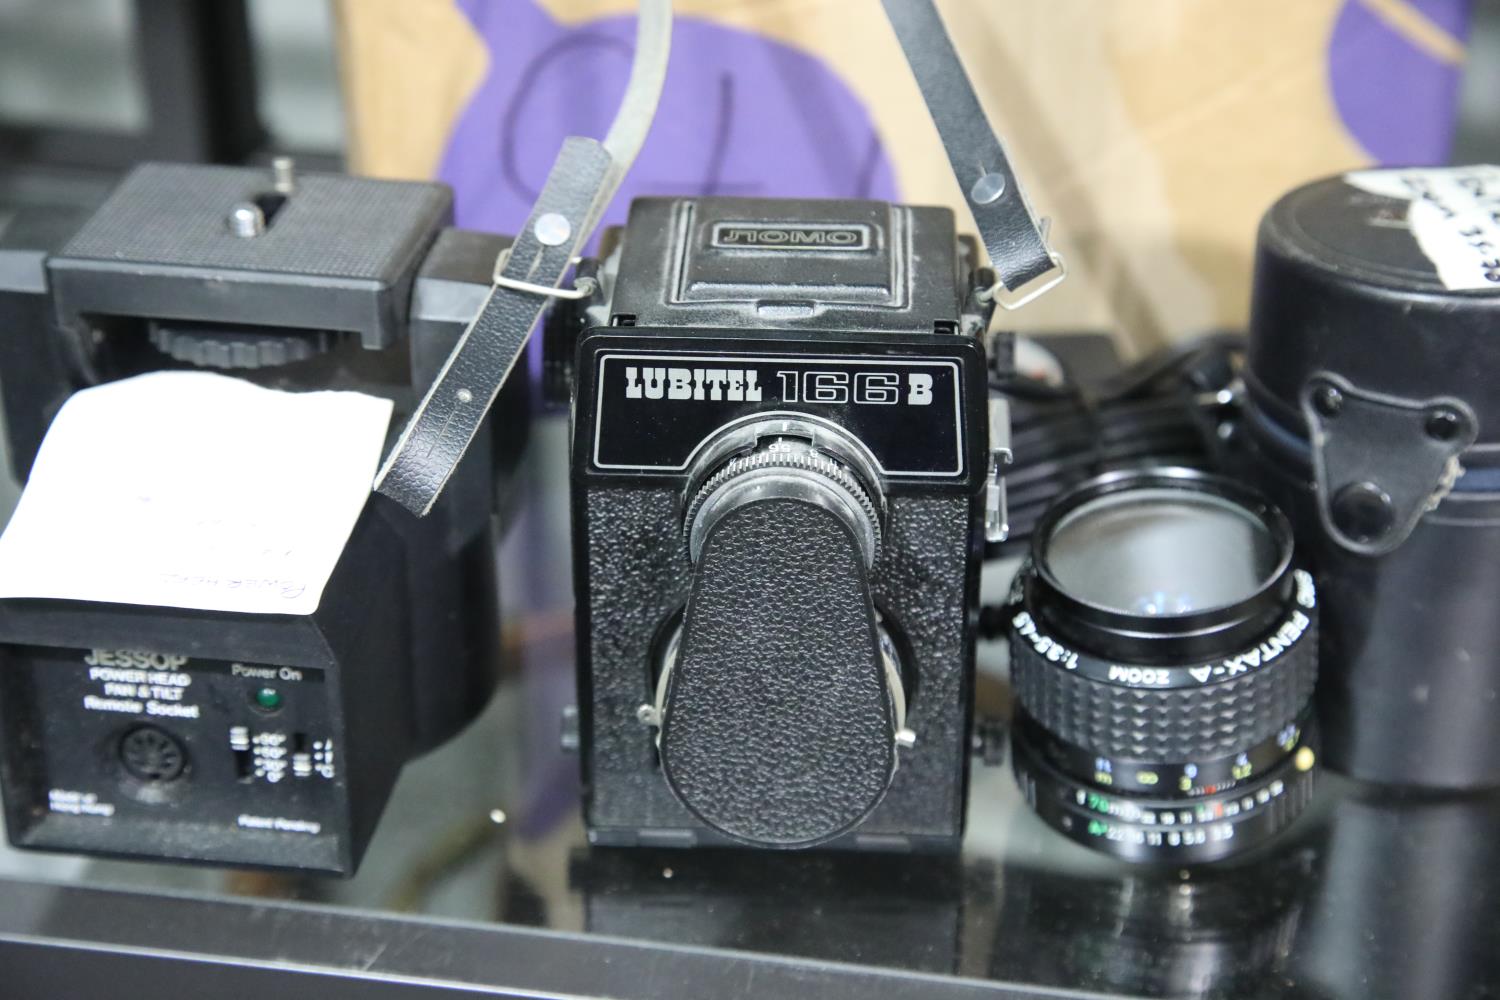 Lubitel 166B camera, Pentax A-zoom lens etc. P&P Group 3 (£25+VAT for the first lot and £5+VAT for